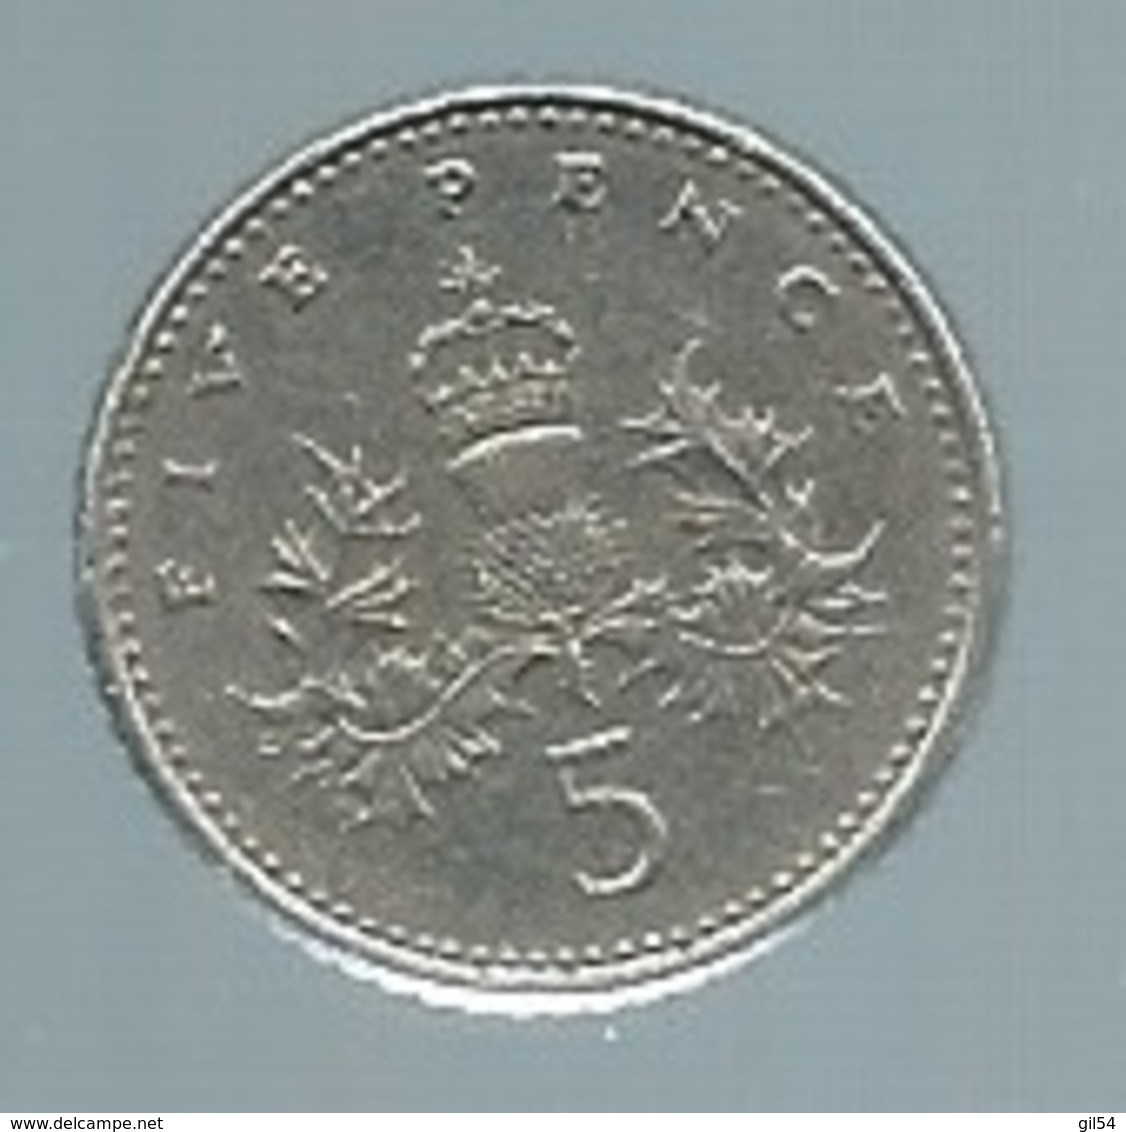 GREAT BRITAIN - 5 PENCE - 1990 Pieb 21702 - 5 Pence & 5 New Pence